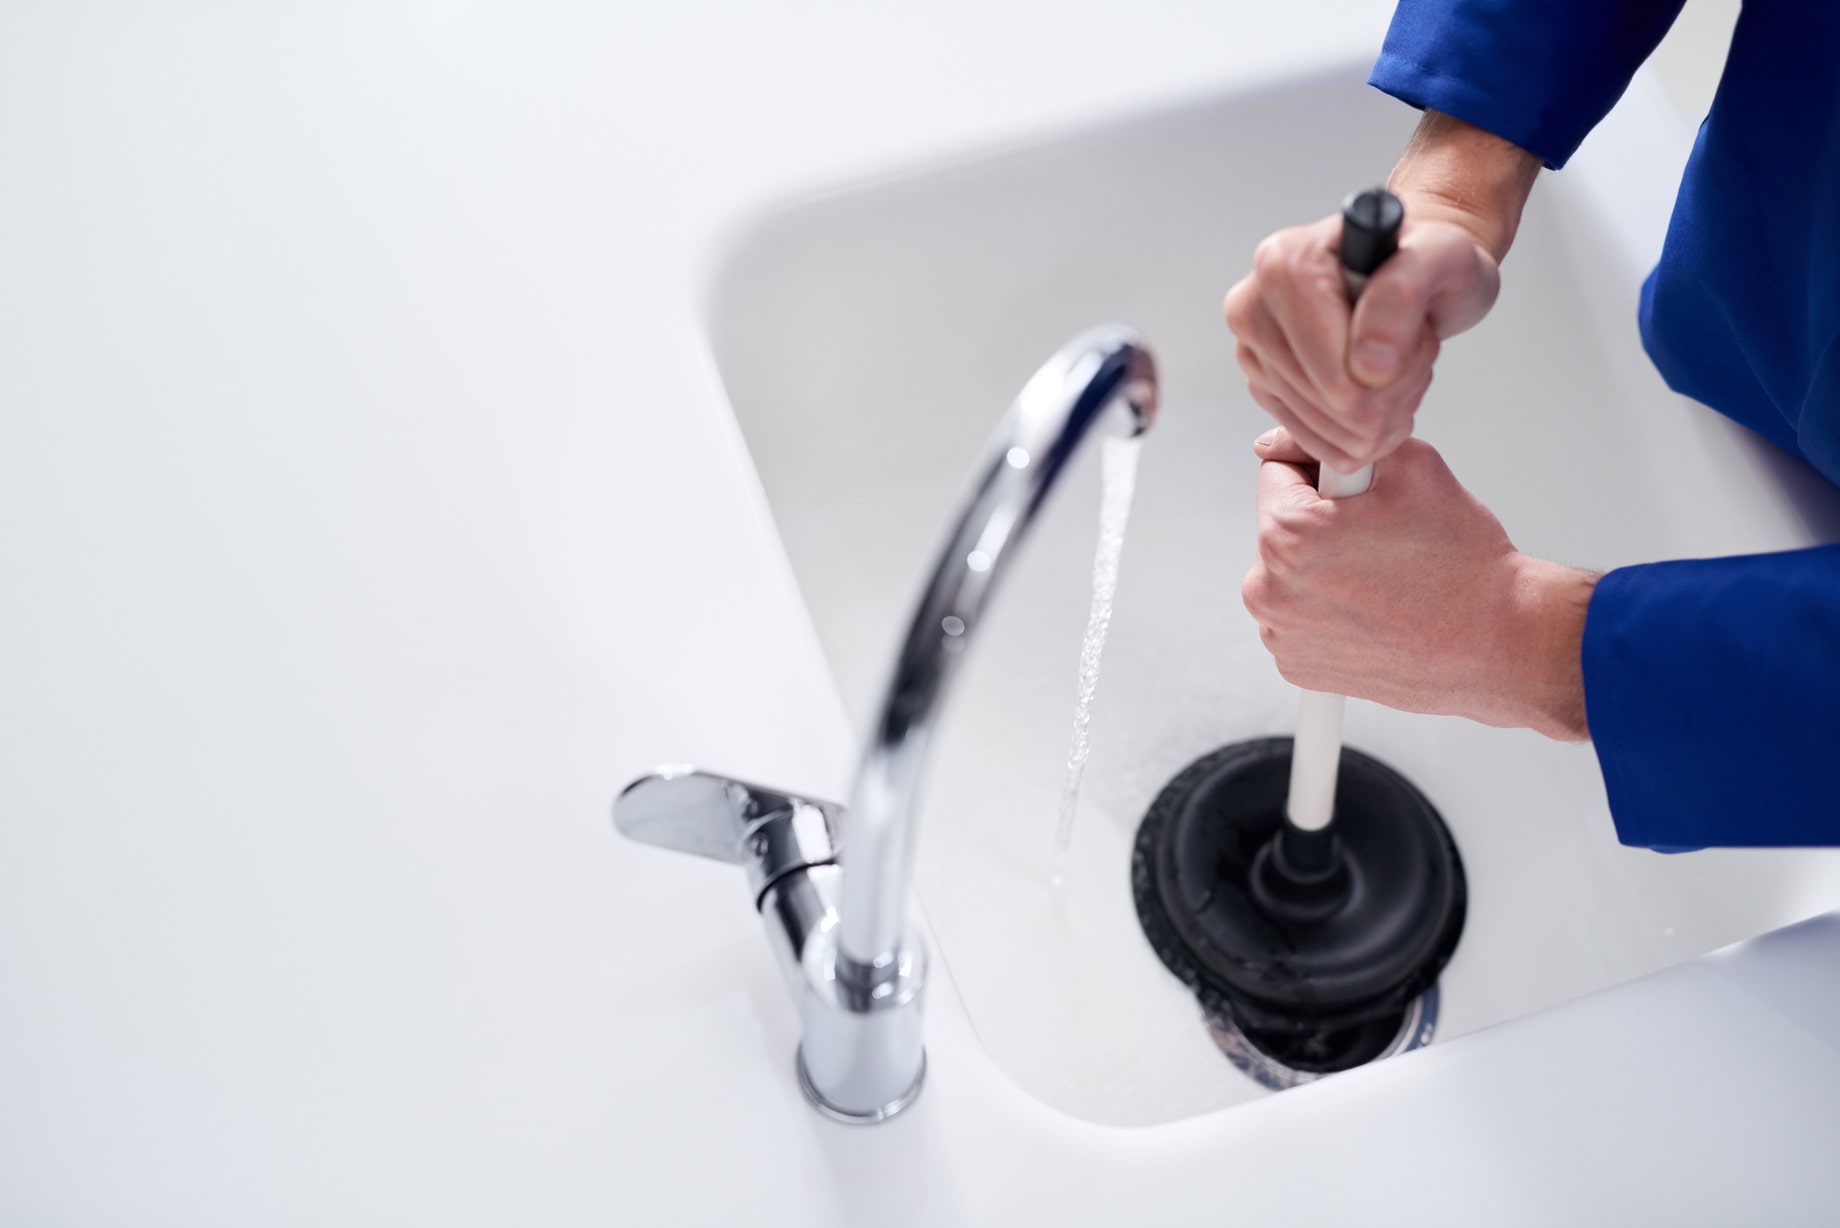 A person using a plunger in a white sink to clear a blockage.